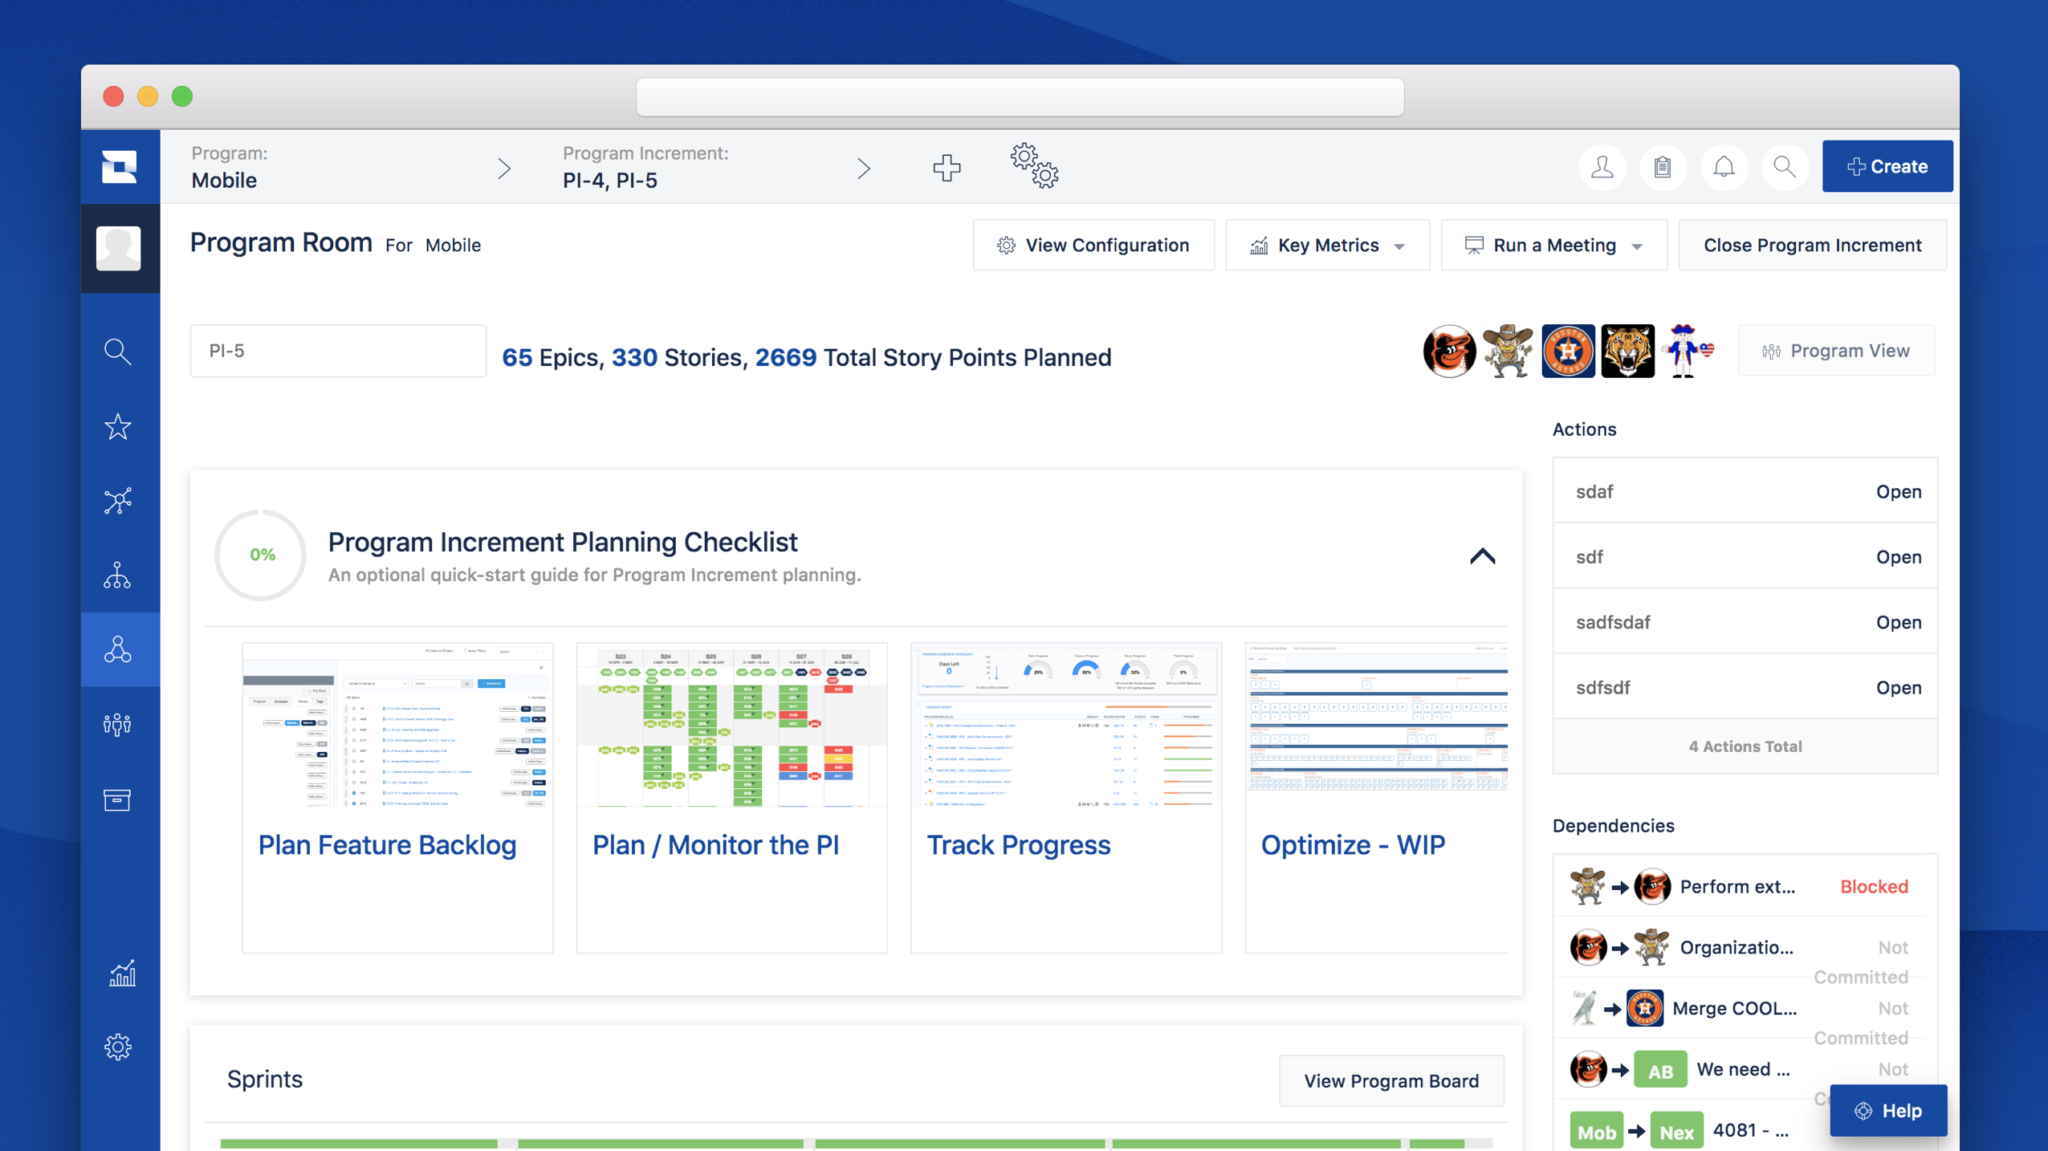 A summary overview of the program in Jira Align's Program Room. It shows a PI planning checklist and summary of epics, stories, and story points across the program for upcoming sprints.